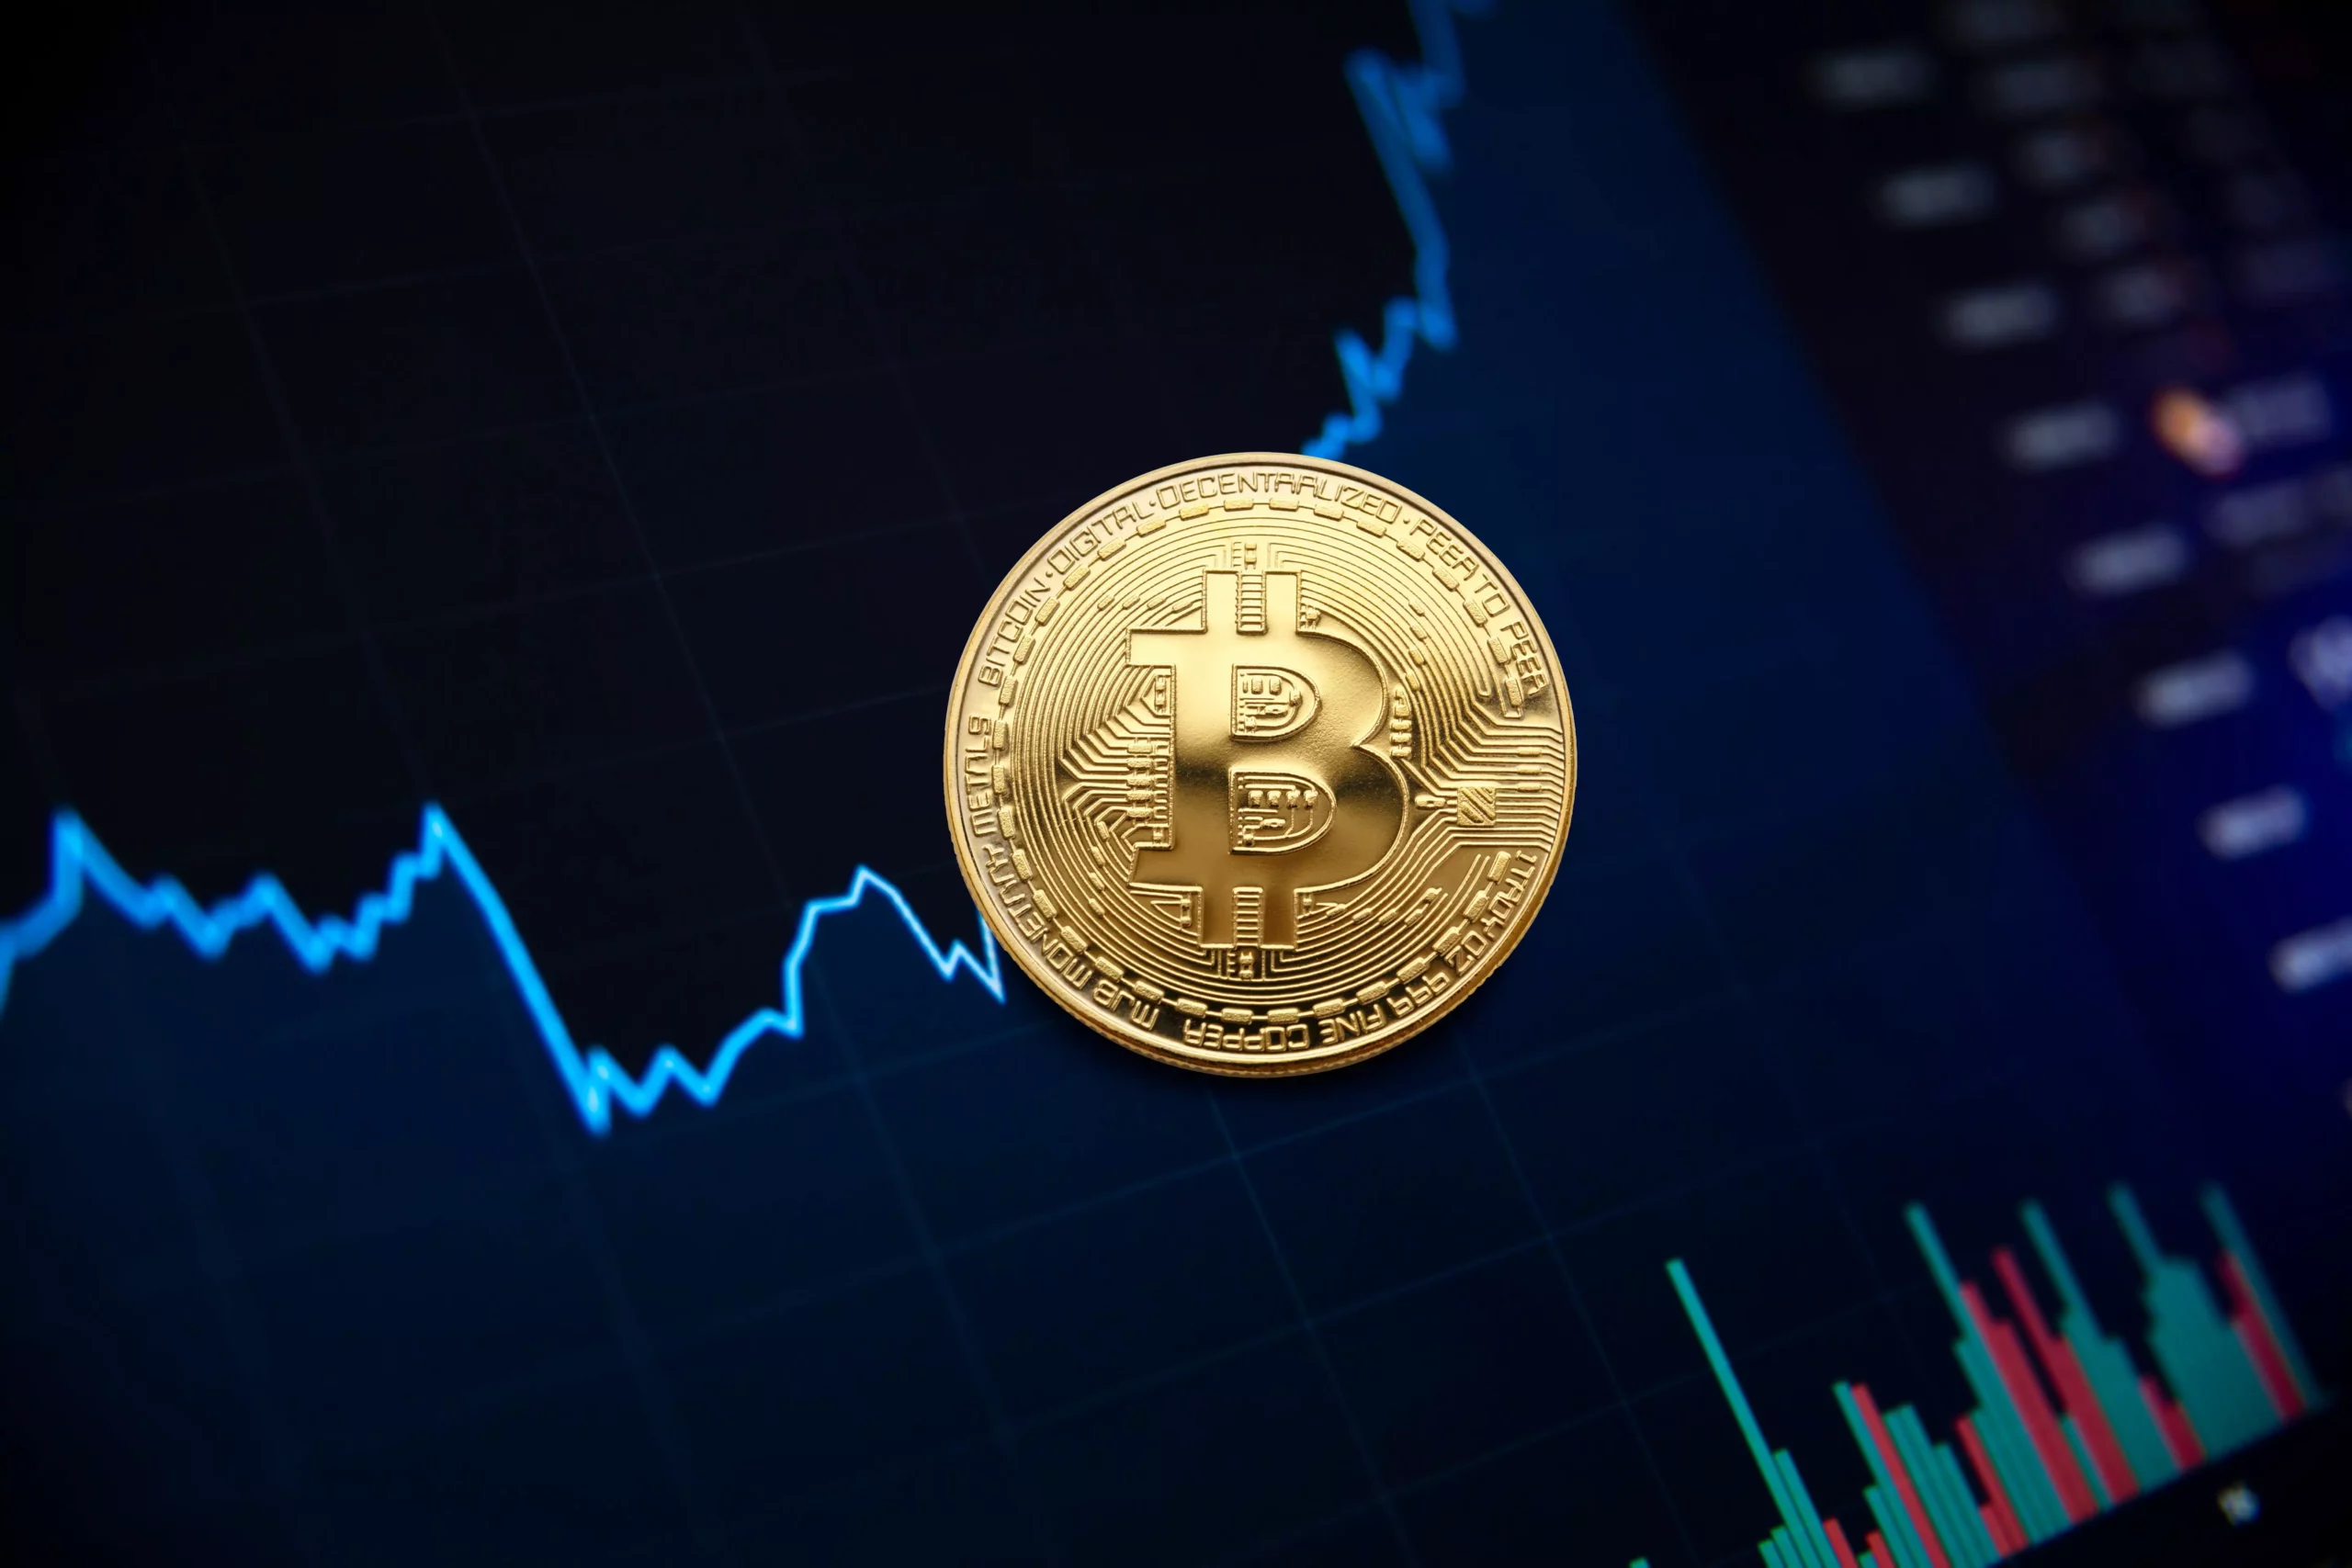 Bitcoin Analyst Predicts Strong Price Surge: Last Chance to Buy Below $40,000